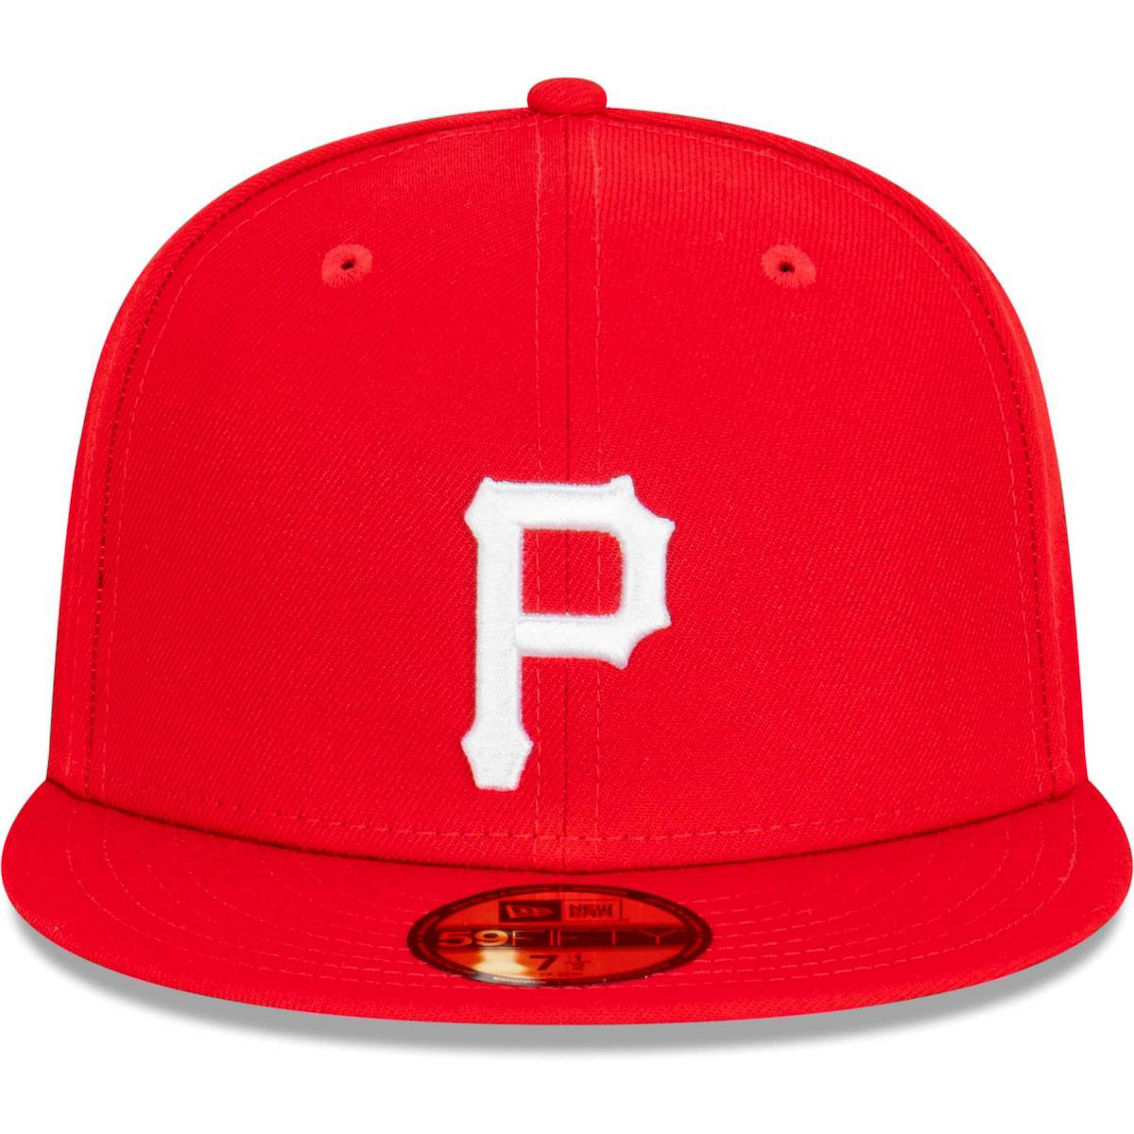 New Era Men's Red Pittsburgh Pirates Sidepatch 59FIFTY Fitted Hat - Image 3 of 4